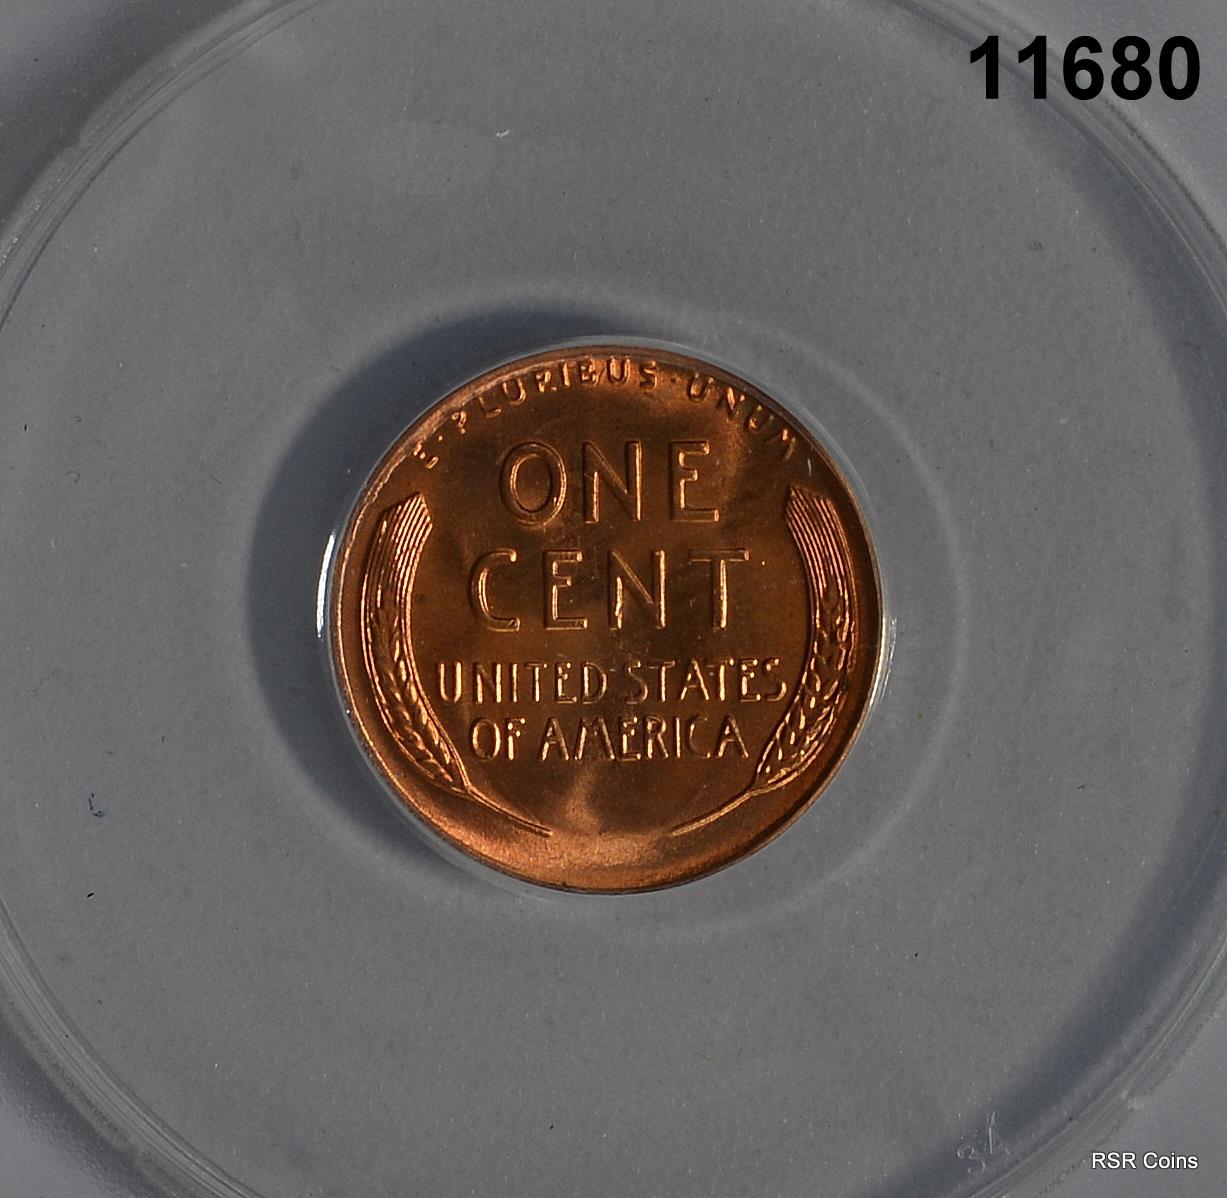 1954 S LINCOLN WHEAT CENT ANACS CERTIFIED MS67 RED FLASHY! #11680